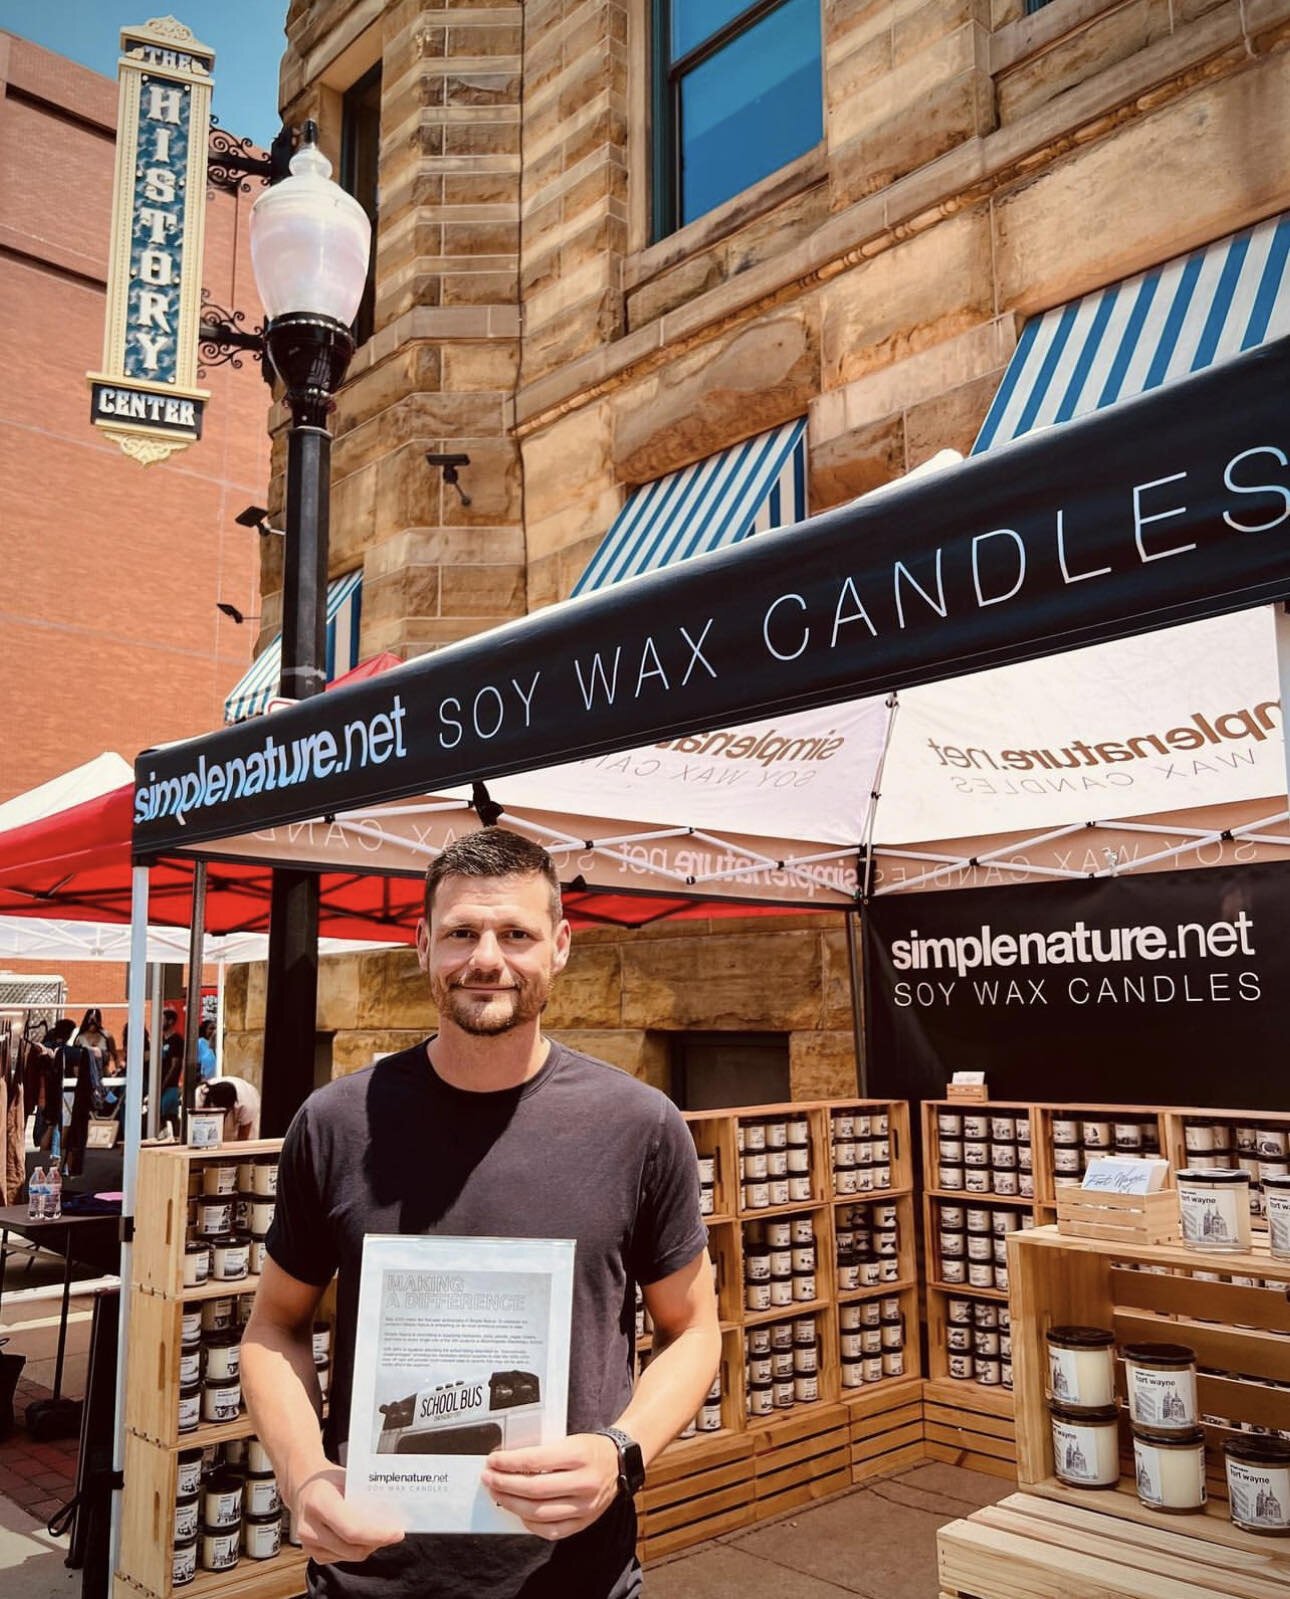 Simple Nature offers soy wax candles based around three concepts: clean (environmentally friendly), clear (know why you are taking action), and community (get involved by helping others).